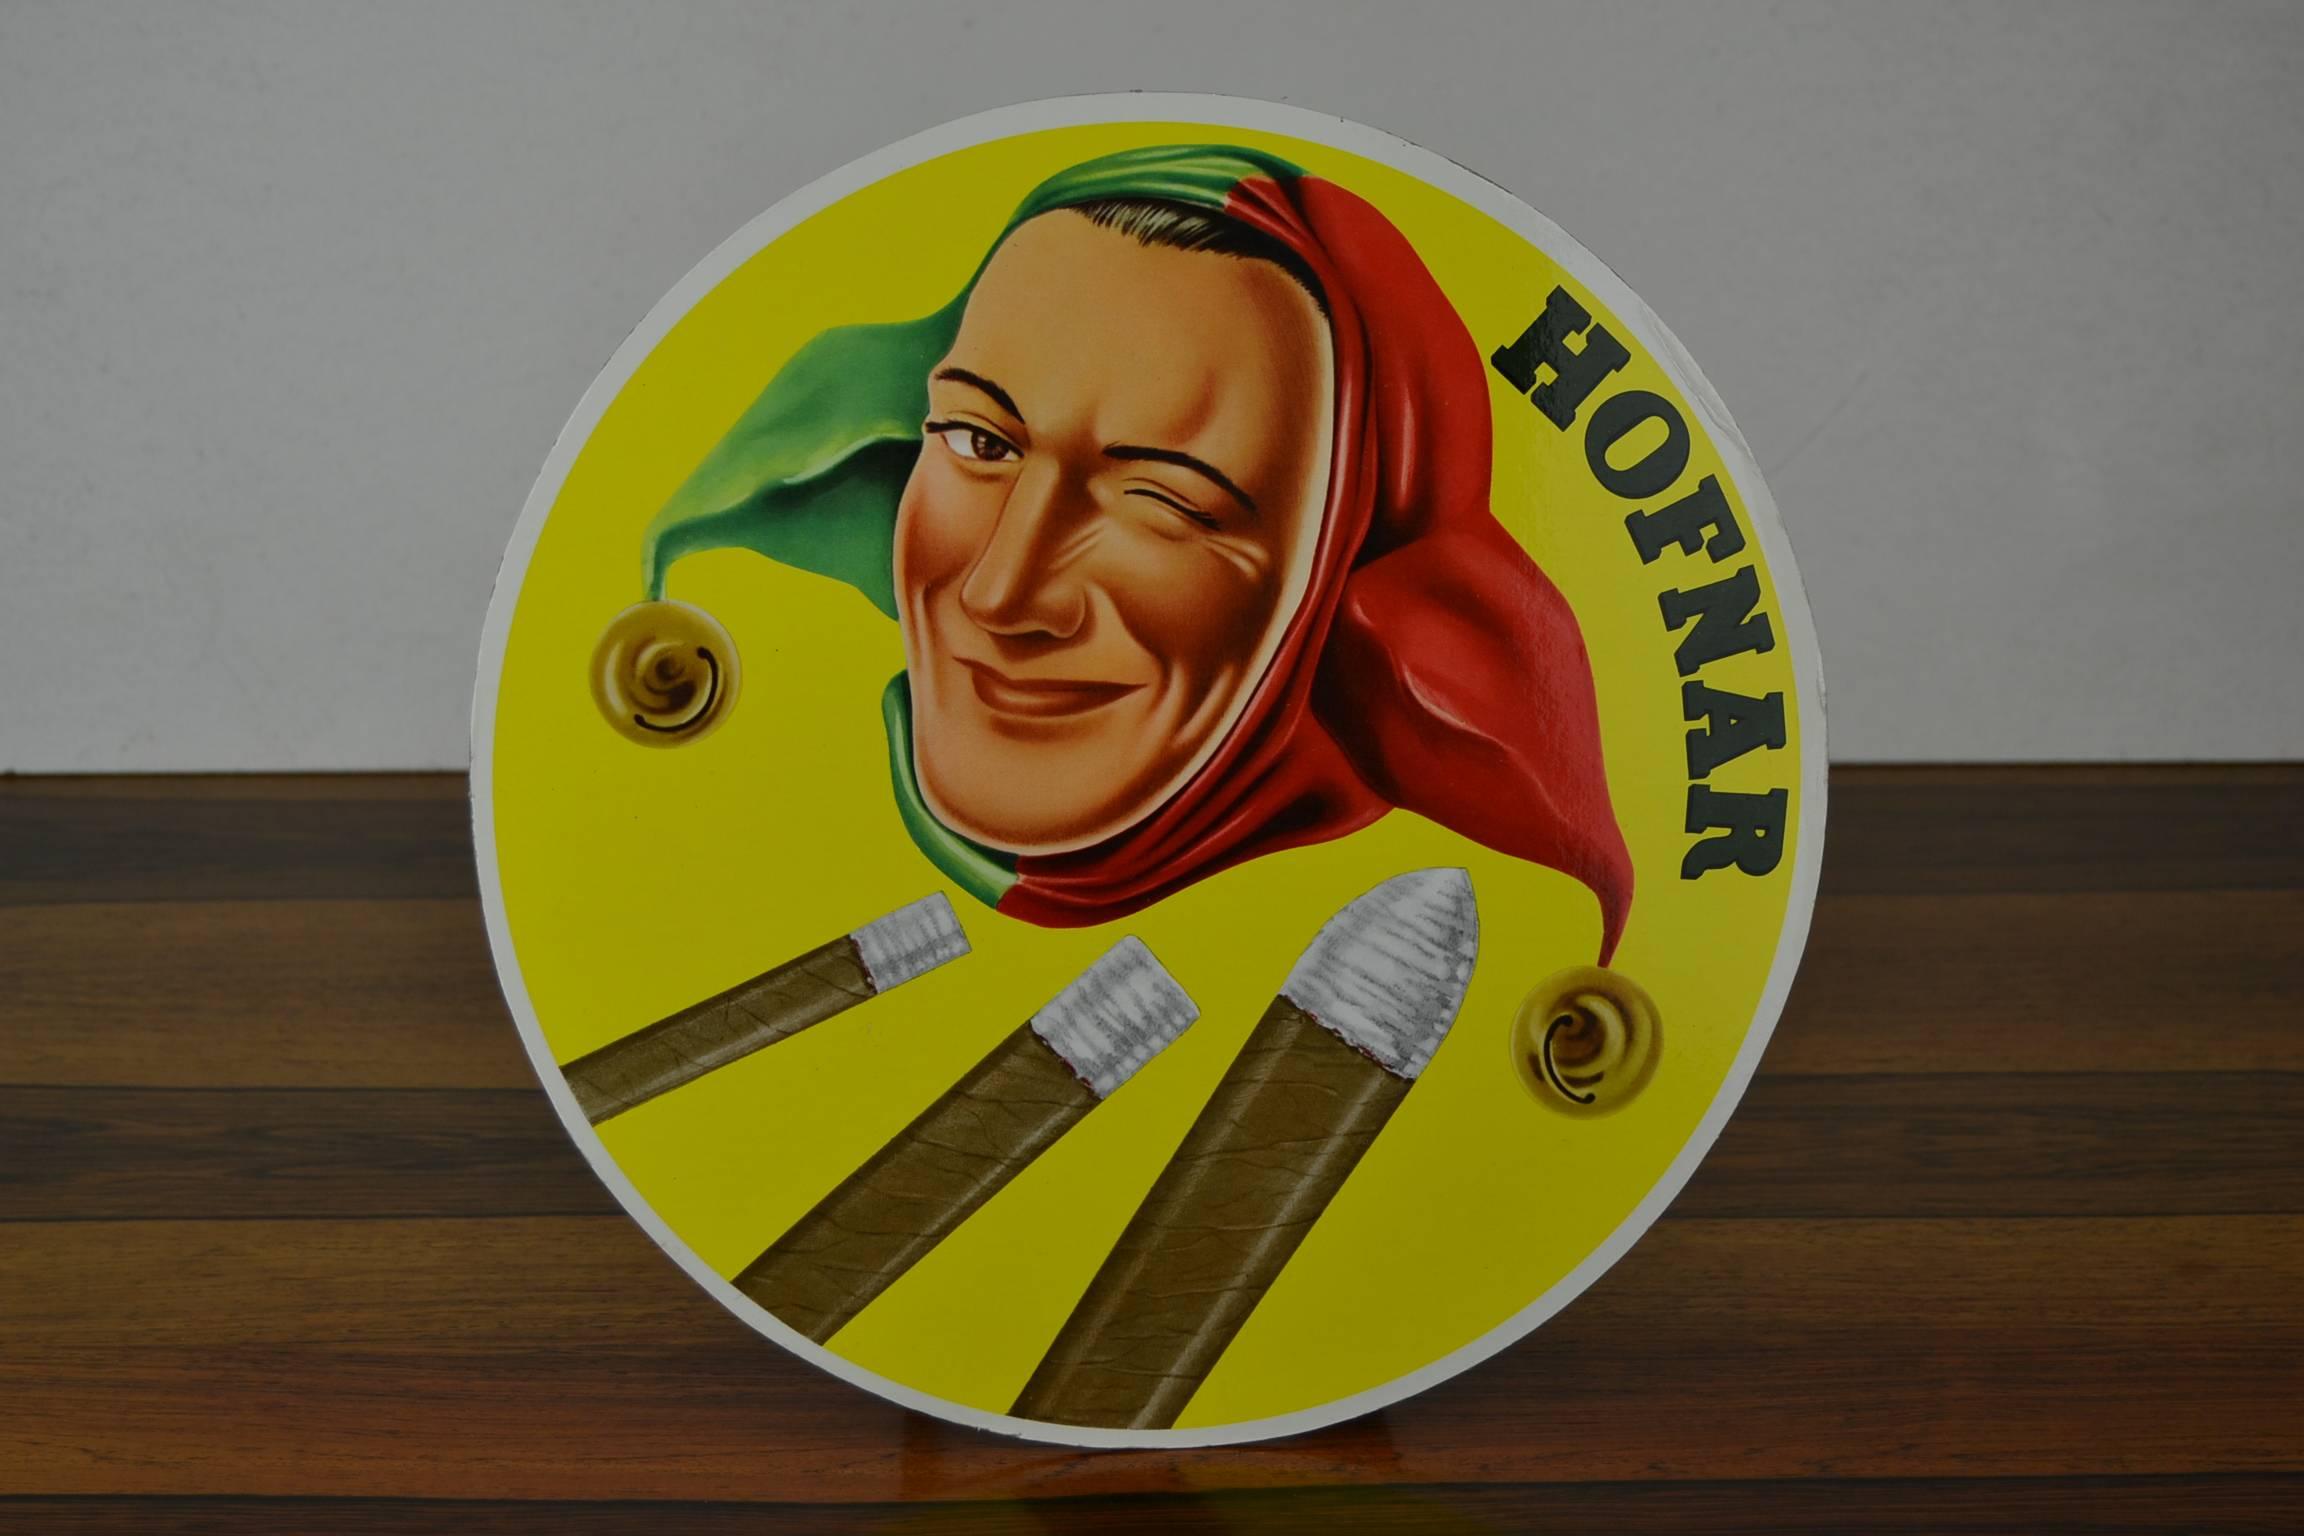 Paper 1950s Hofnar Cigars Advertising Display Sign with Jester